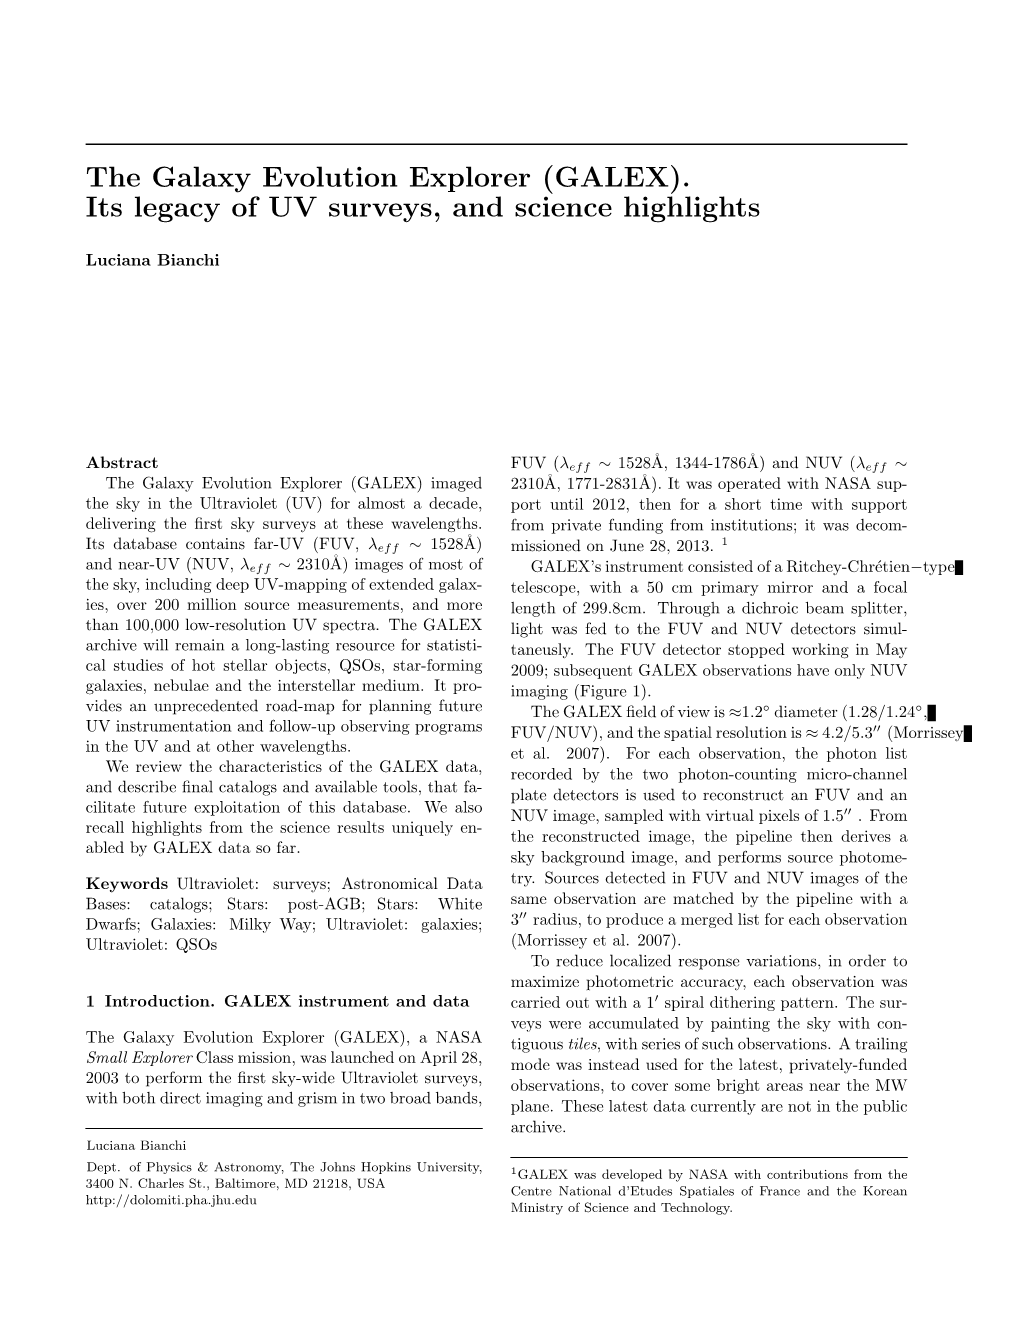 The Galaxy Evolution Explorer (GALEX). Its Legacy of UV Surveys, and Science Highlights